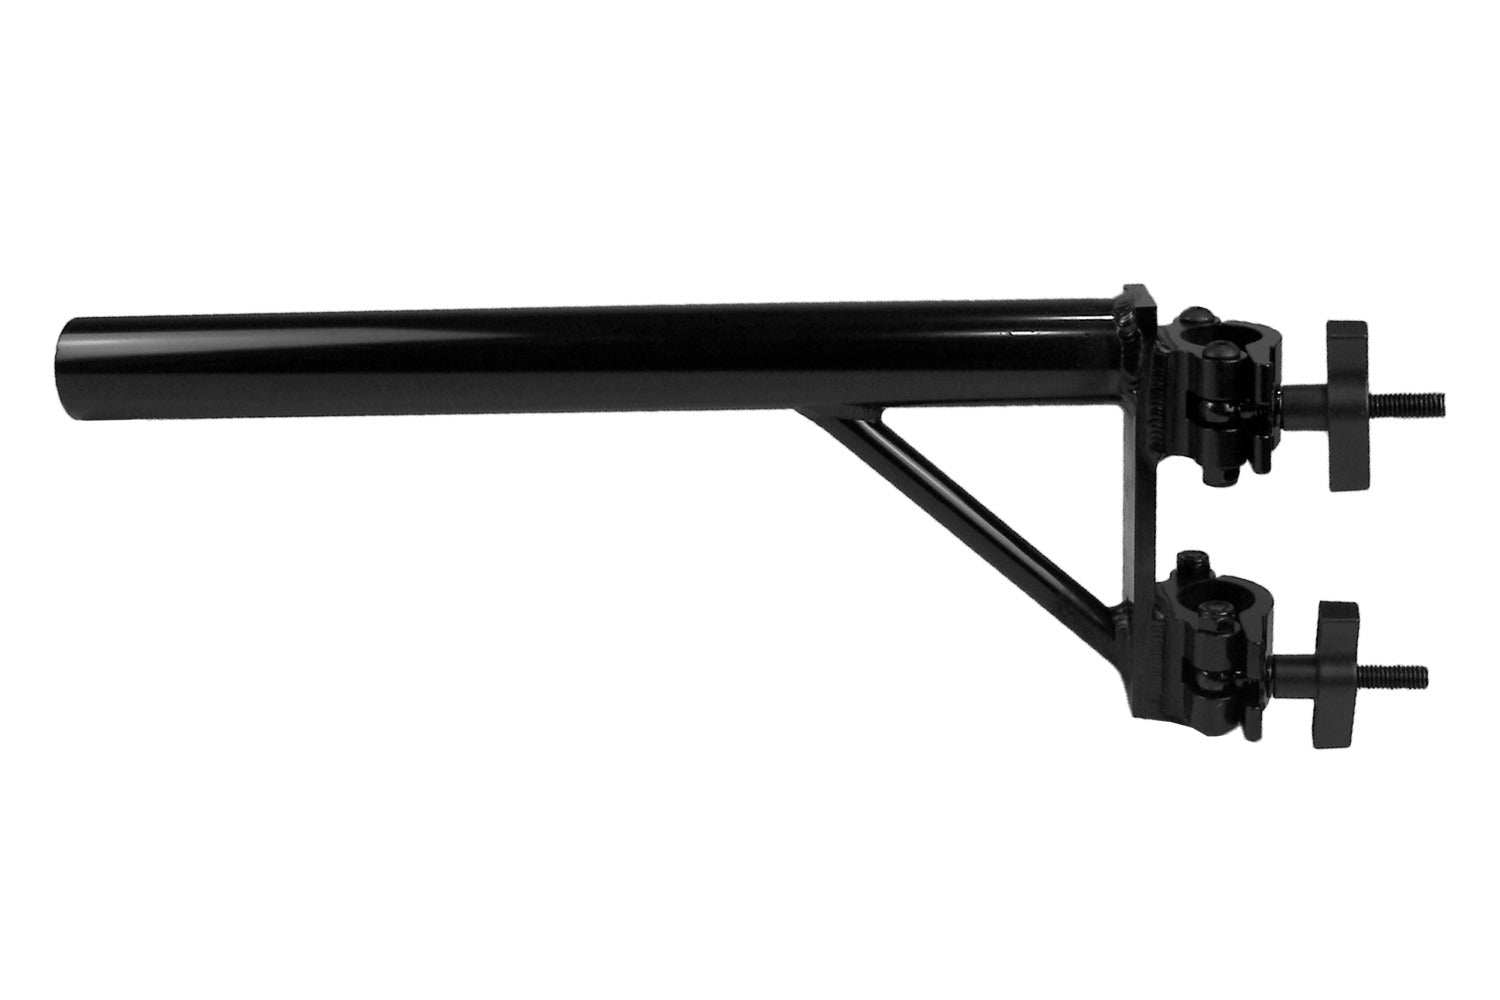 BOOMARM205B - 0.5m Boom Arm Pole with Double Pipe Clamp (Black)